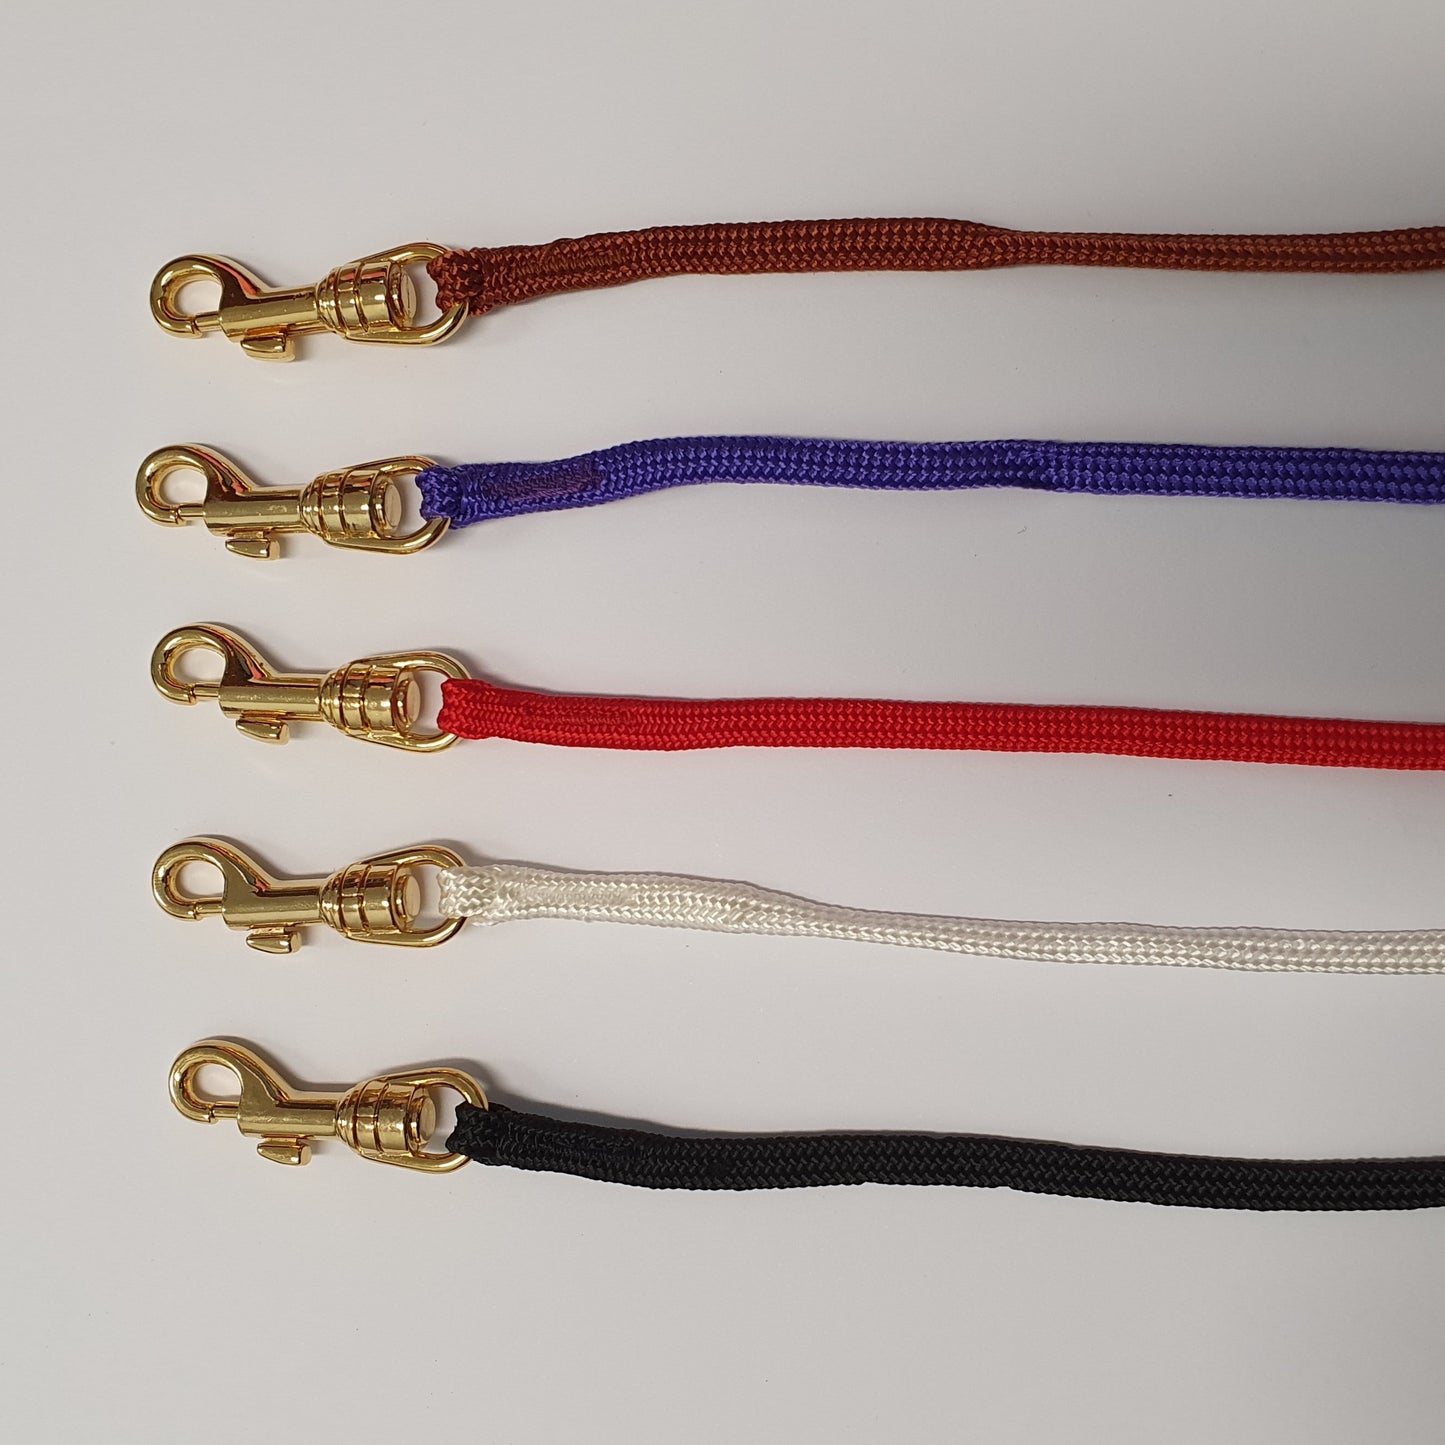 Madan Nylon Clip Show Lead - 48" x 5mm - Assorted Colours - SPECIAL (ND)